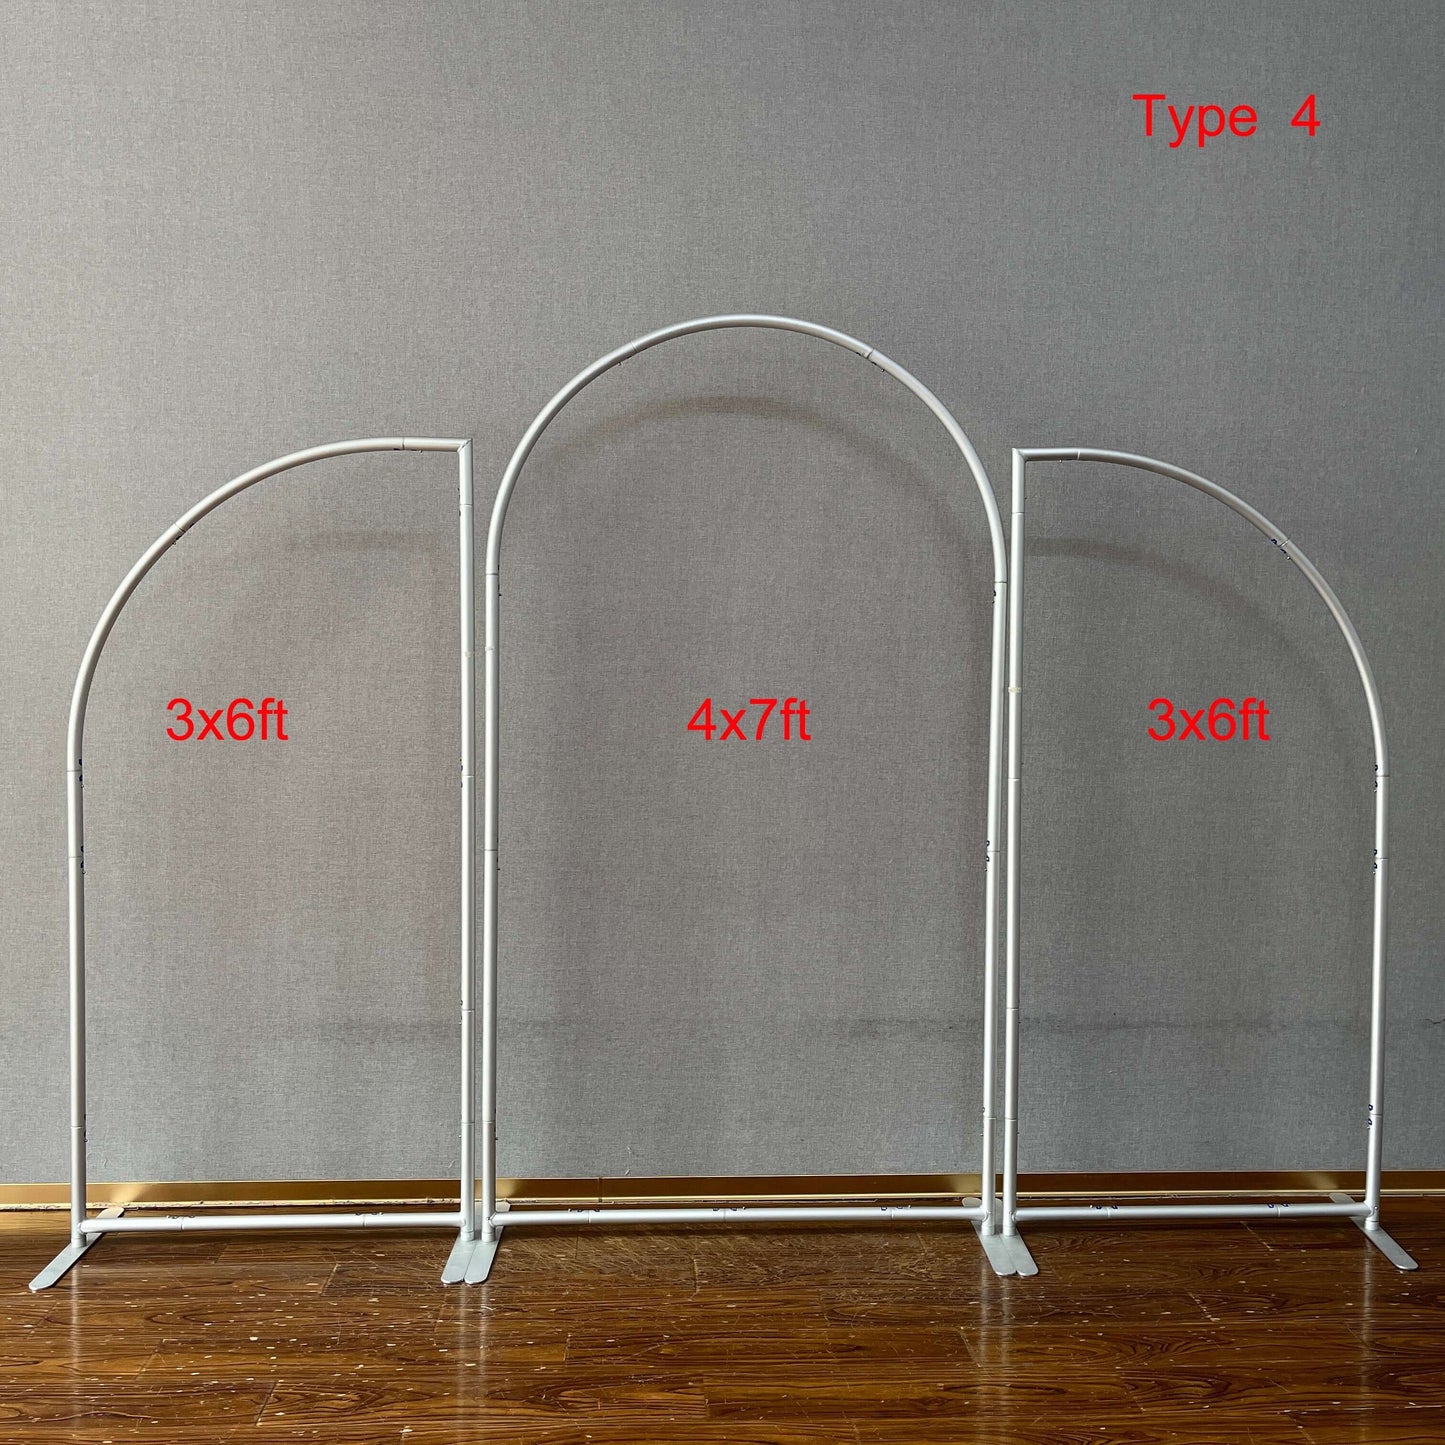 Chiara Arch Stand Frames 5X7Ft Open 3X4Ft 4X7Ft 3X6Ft+4X7Ft+3X6Ft Stands Party Backdrop